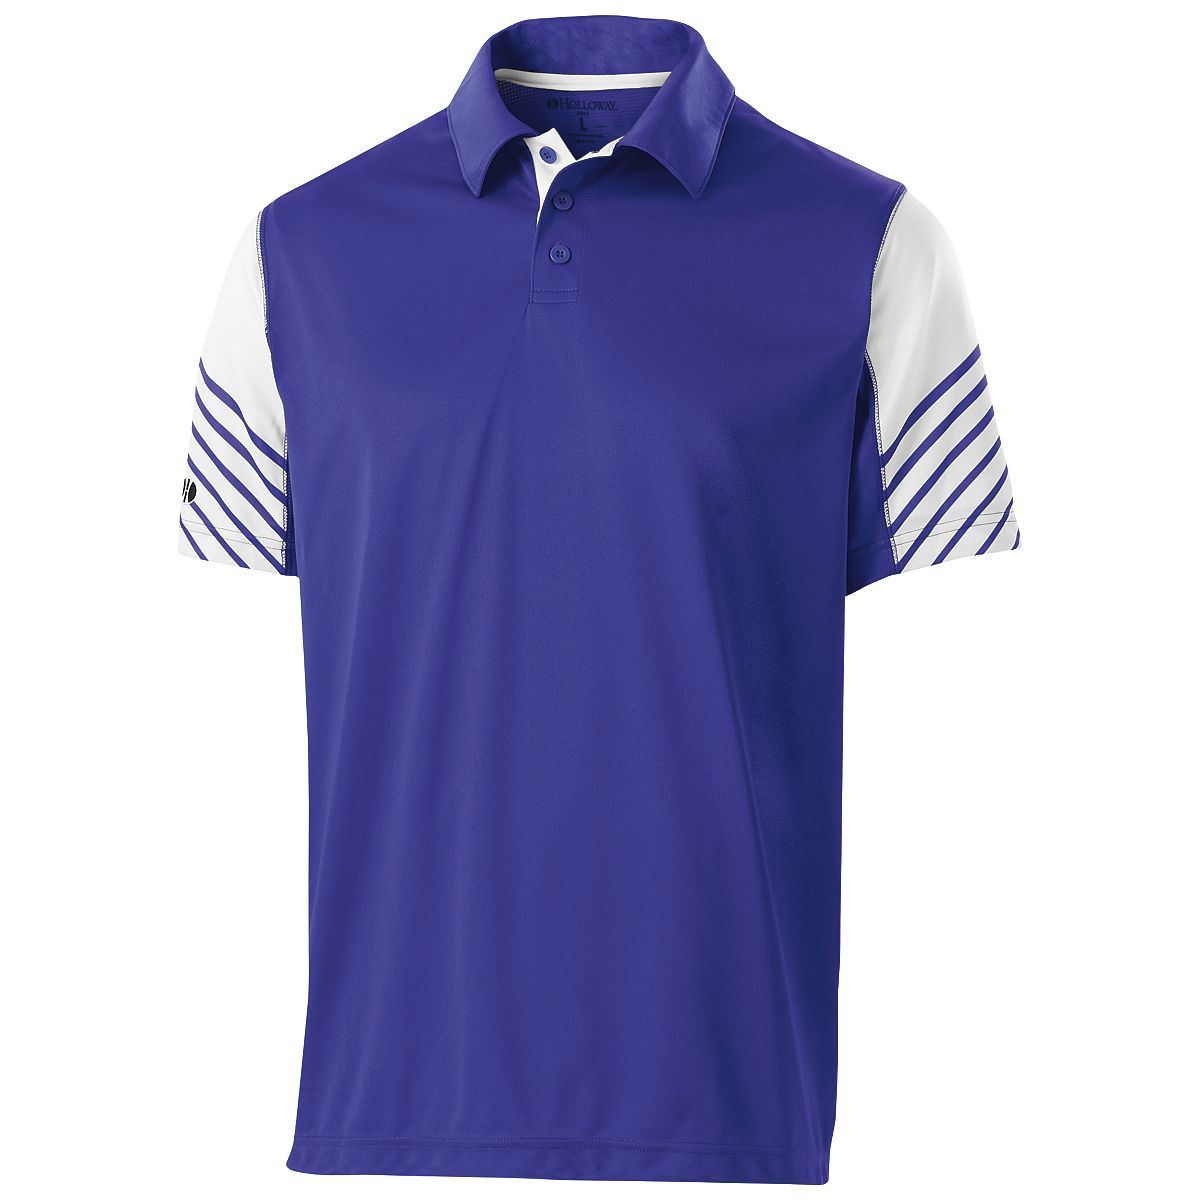 Holloway Arc Polo in Purple/White  -Part of the Adult, Adult-Polos, Polos, Holloway, Shirts product lines at KanaleyCreations.com